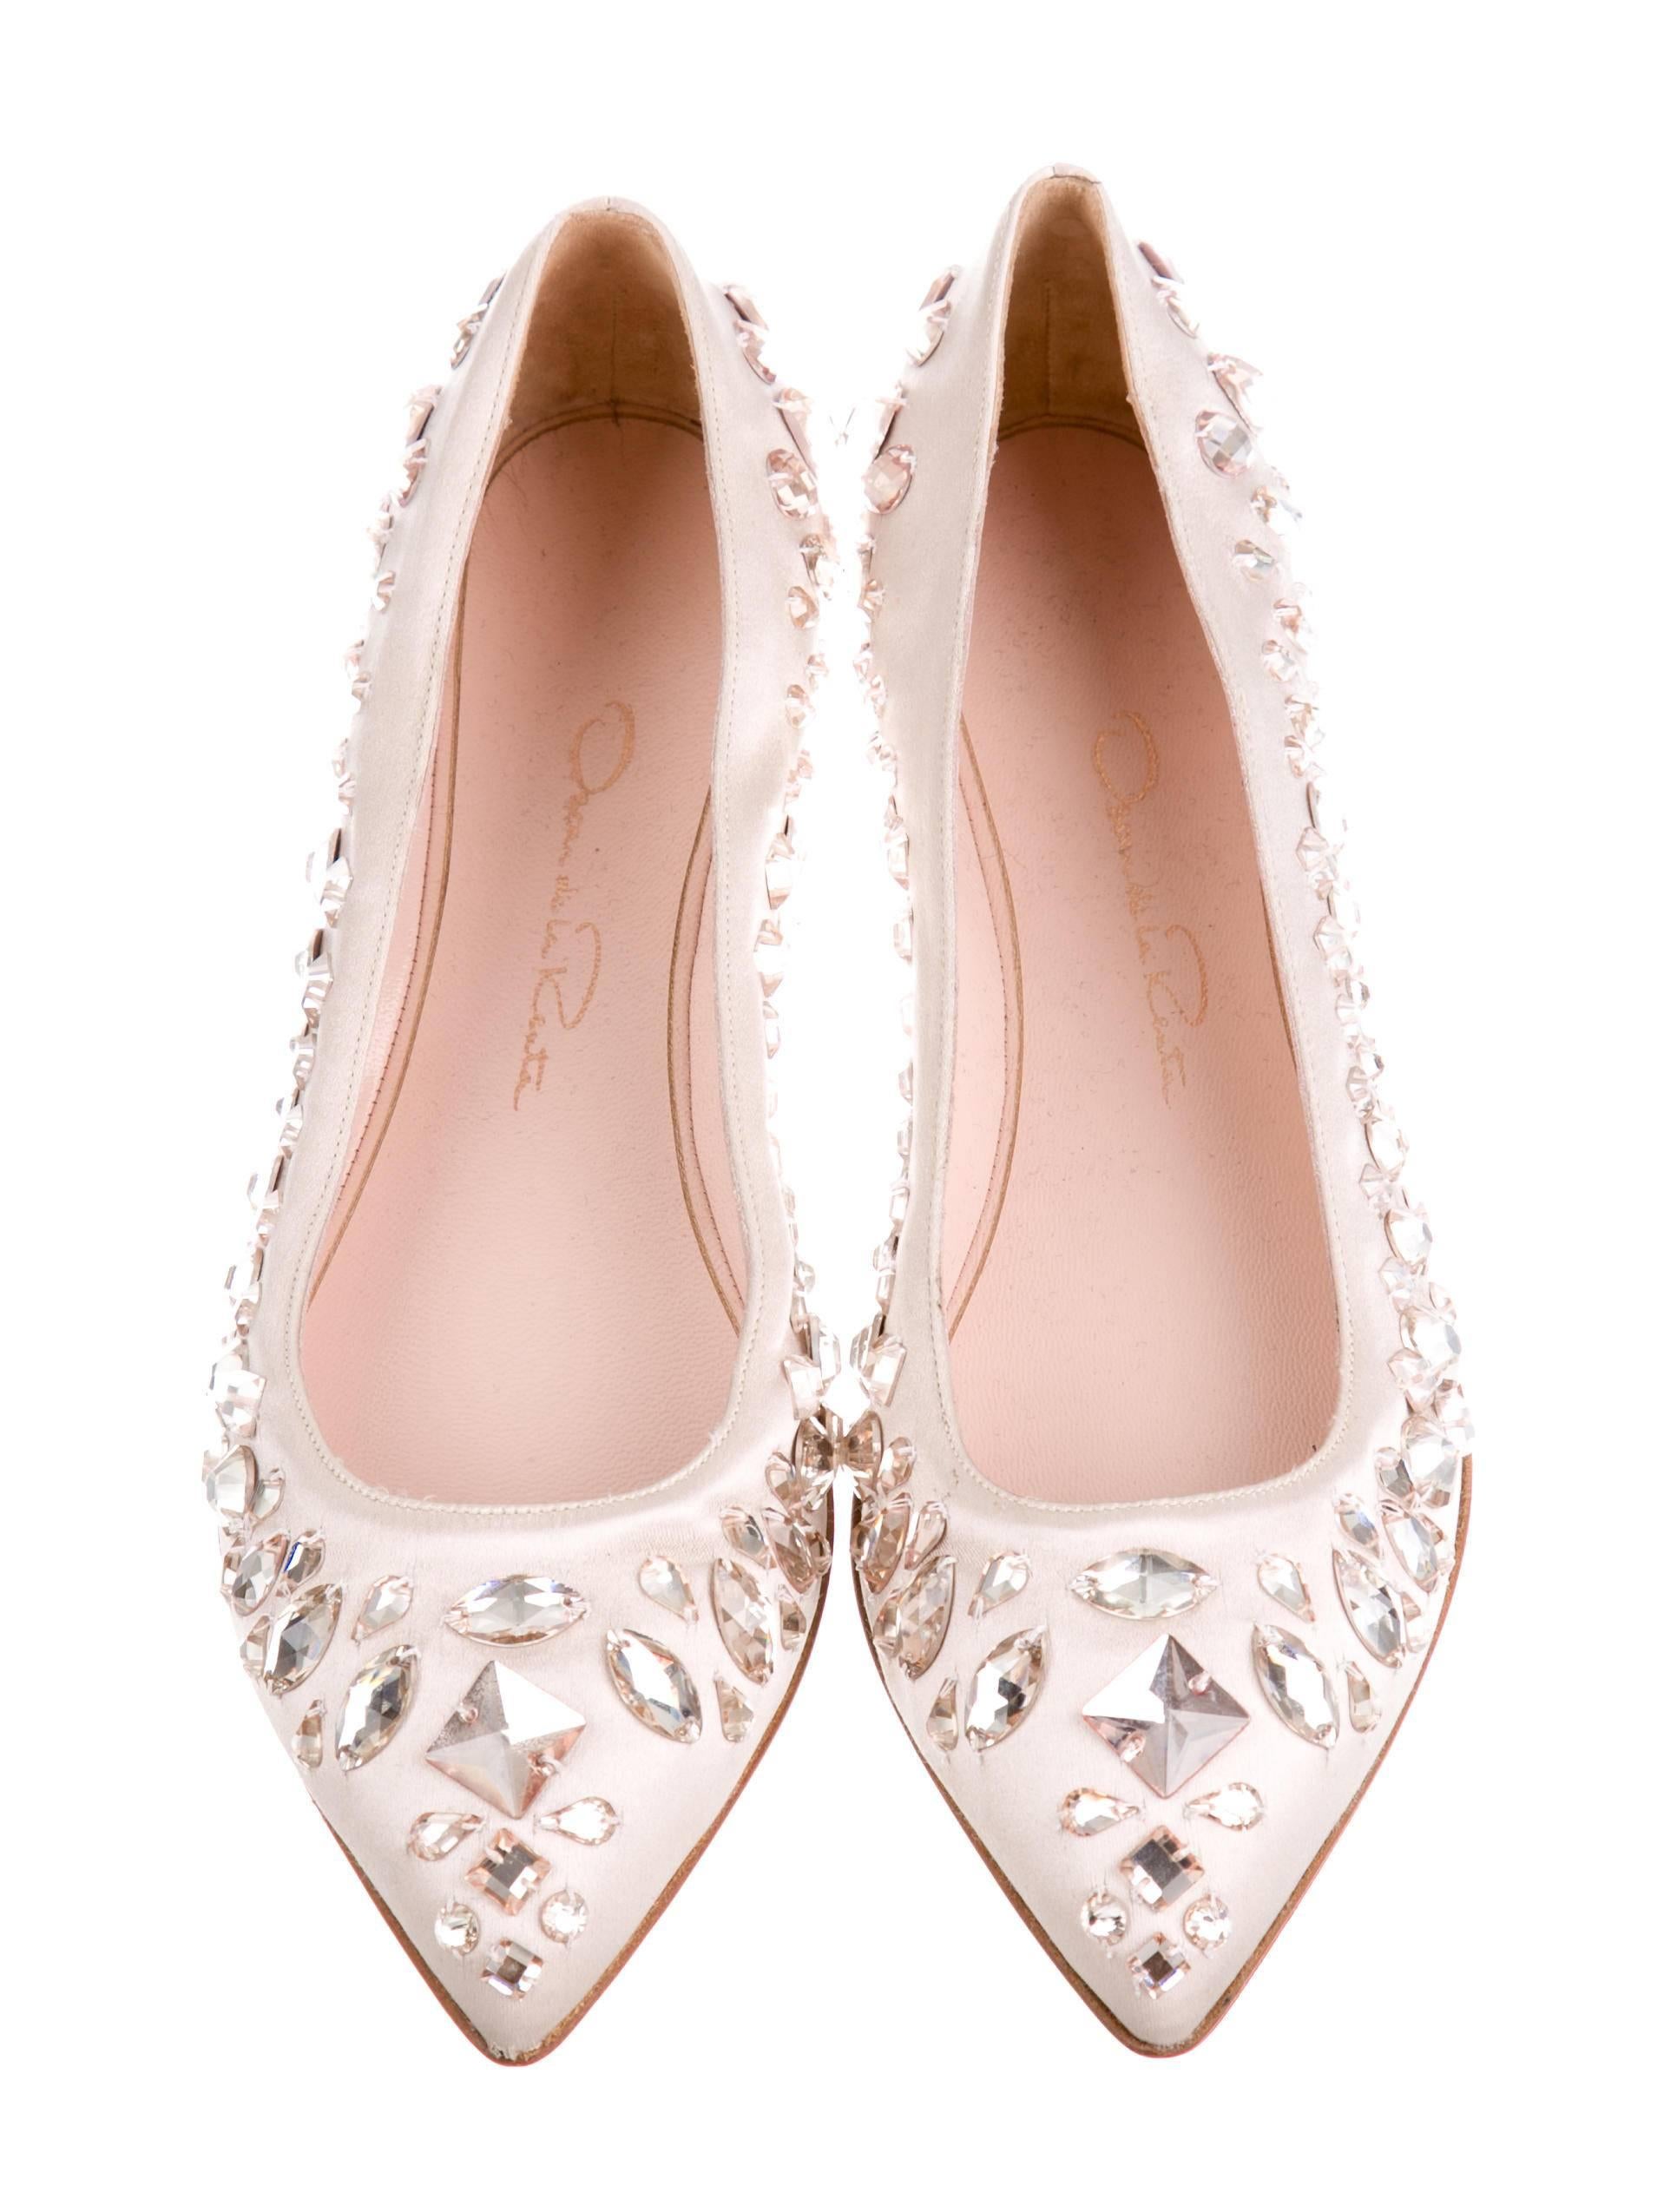 CURATOR'S NOTES

Just in time for spring, summer and wedding season!  Beautiful, brand NEW and SOLD OUT Oscar de la Renta pointy toe ballet flats with jewel bead embellishments.  

The original Oscar de la Renta dust bag and box are included. 